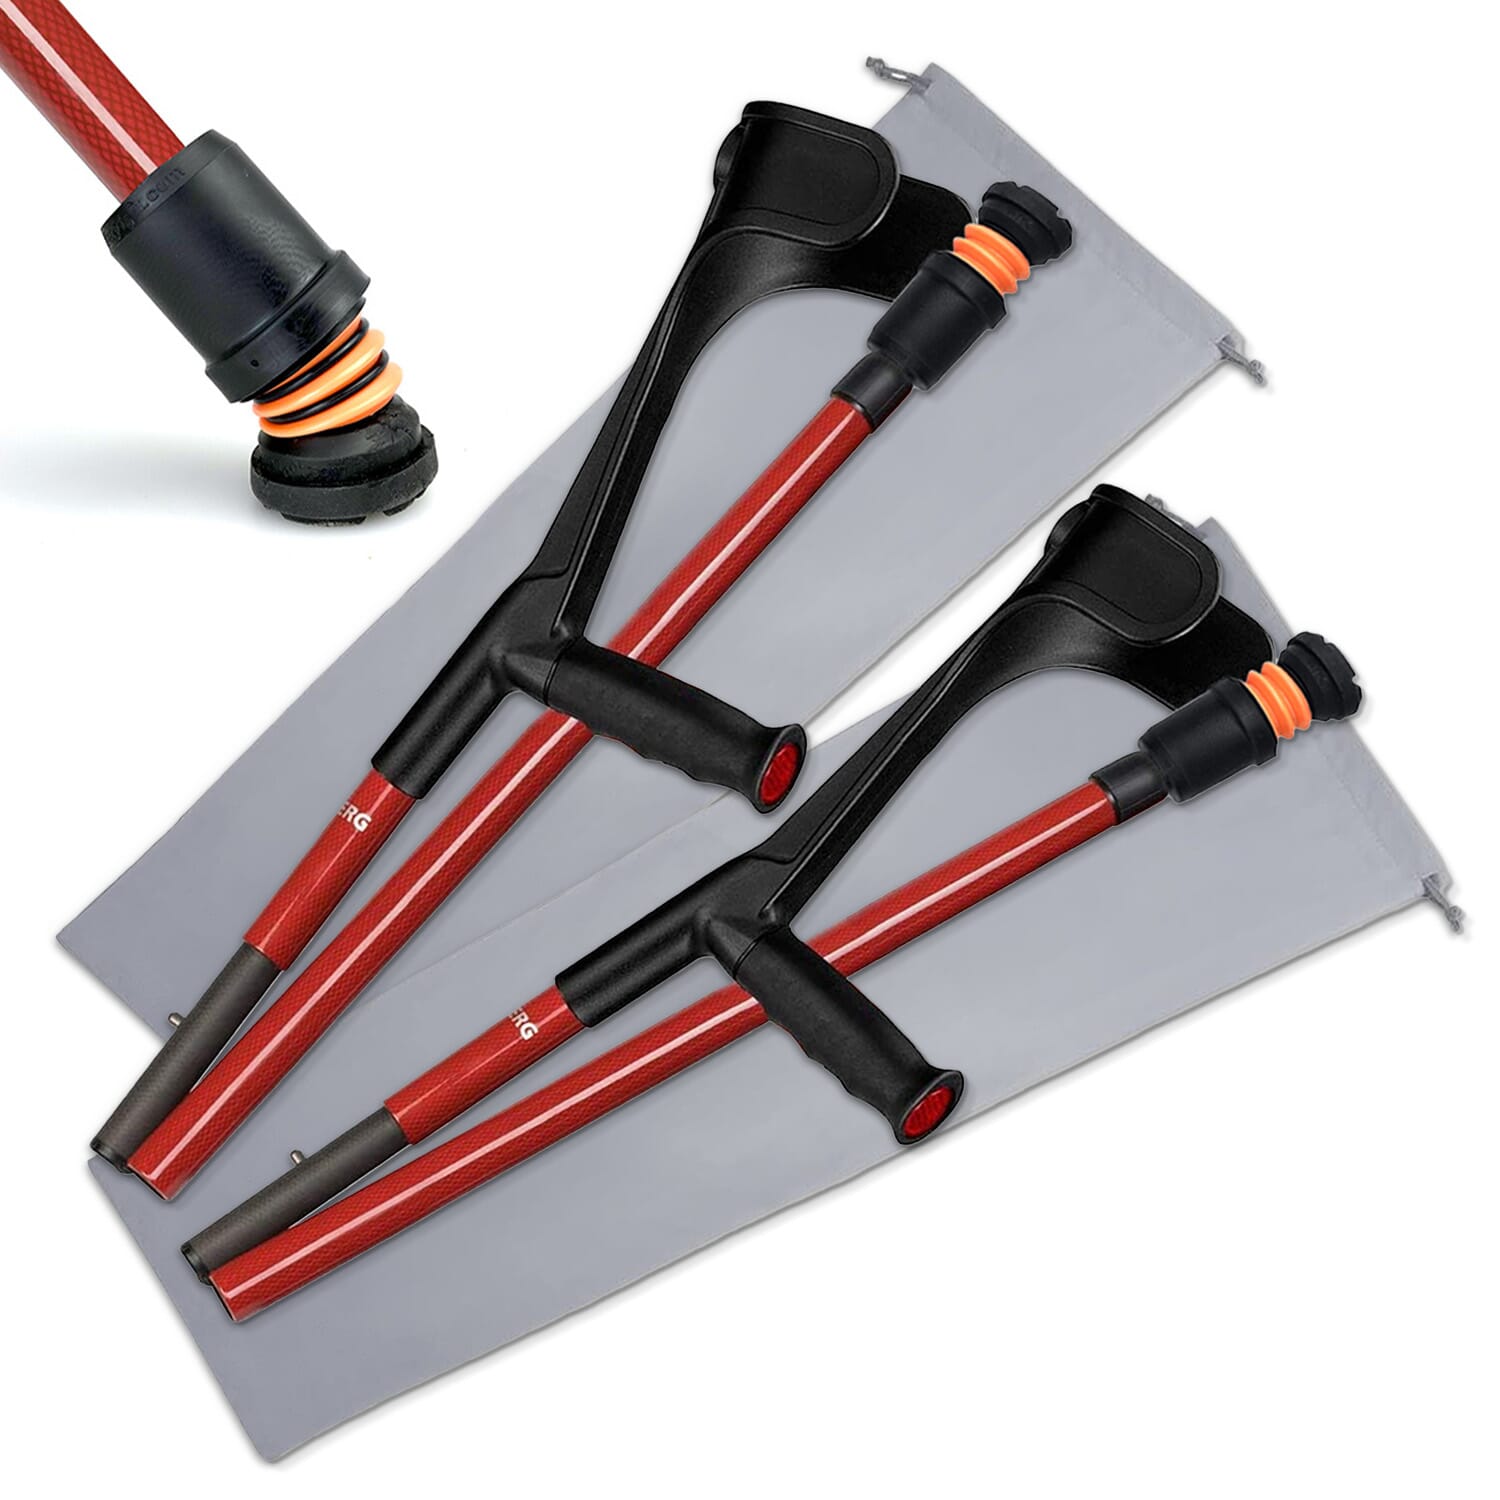 View Flexyfoot Carbon Fibre Folding Crutches Red Pair information